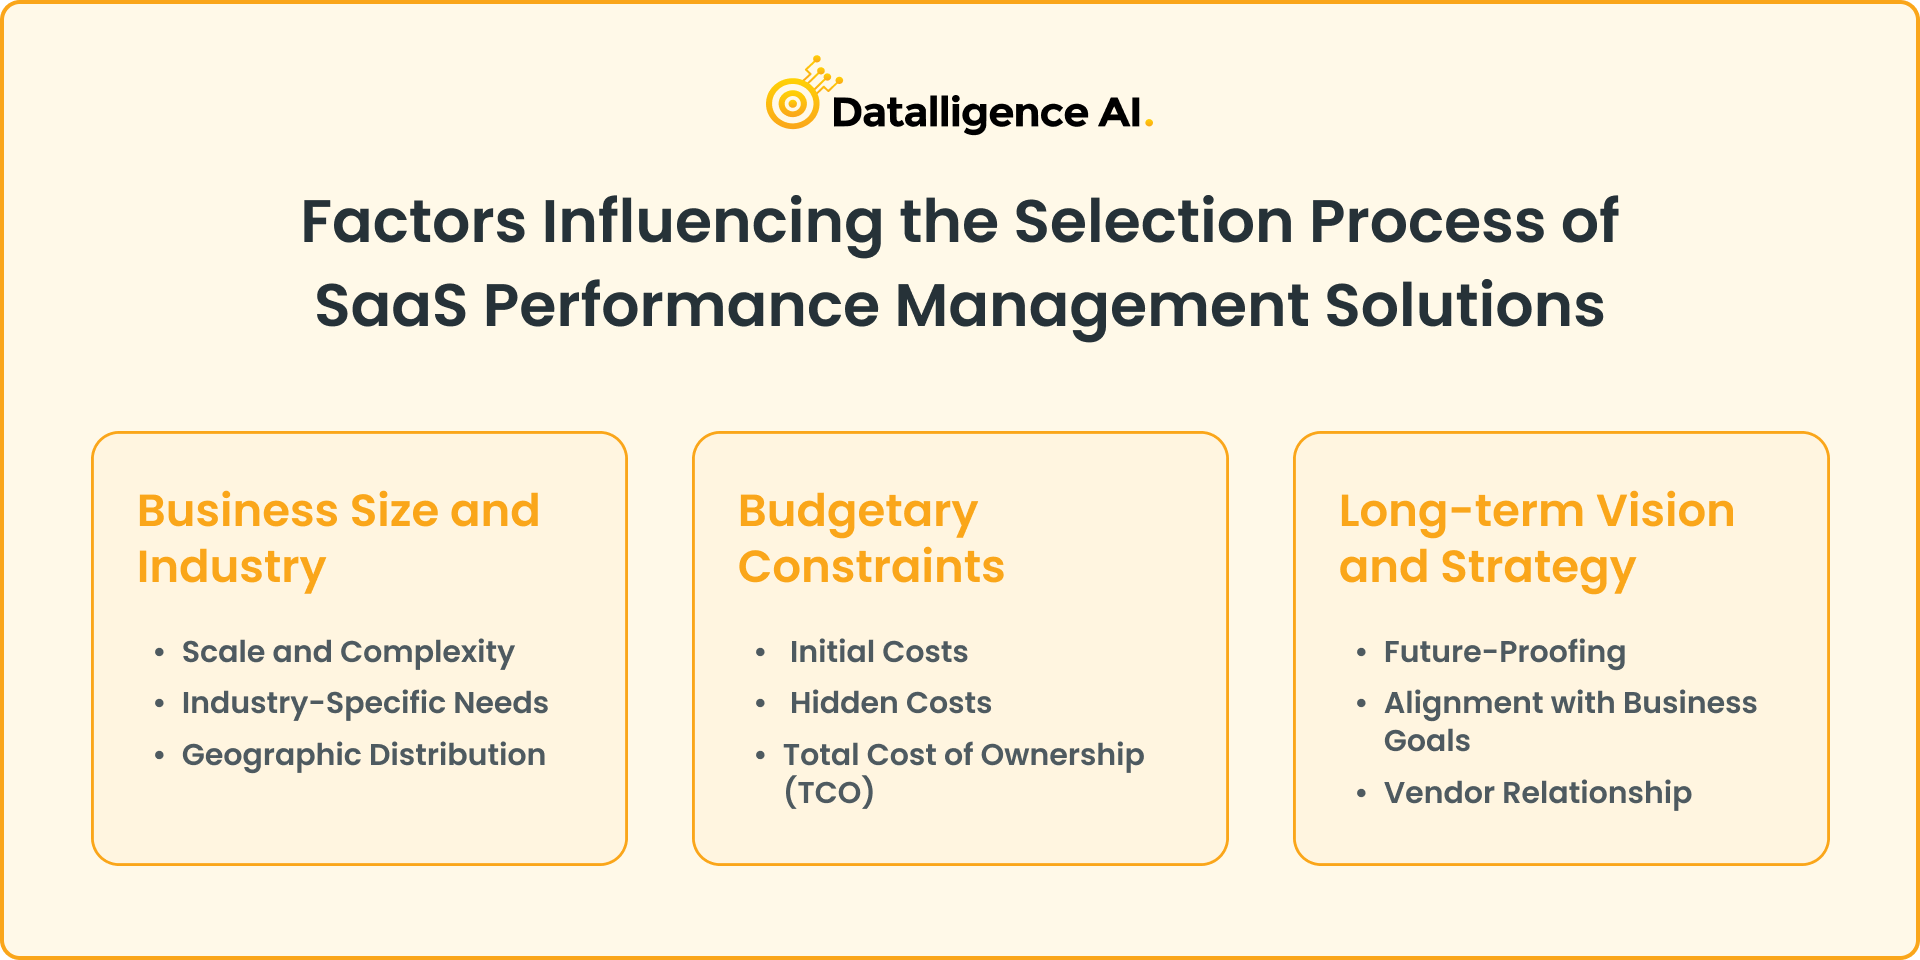 Factors Influencing the Selection Process of SaaS Performance Management Solutions